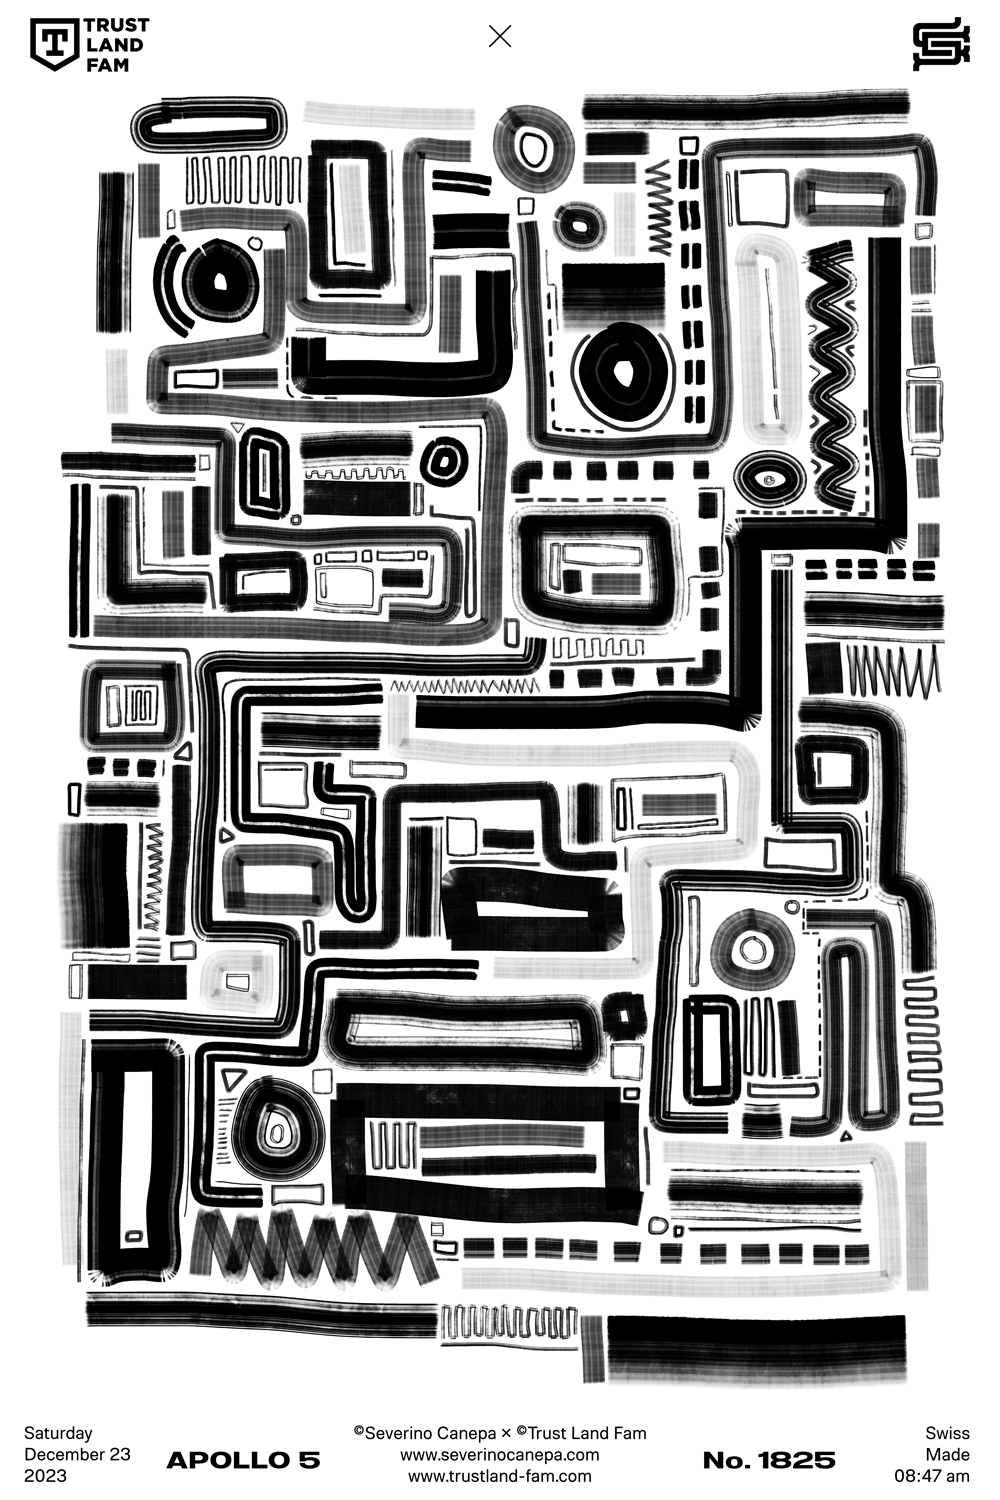 Abstract visual art made of shapes made with marker brushes